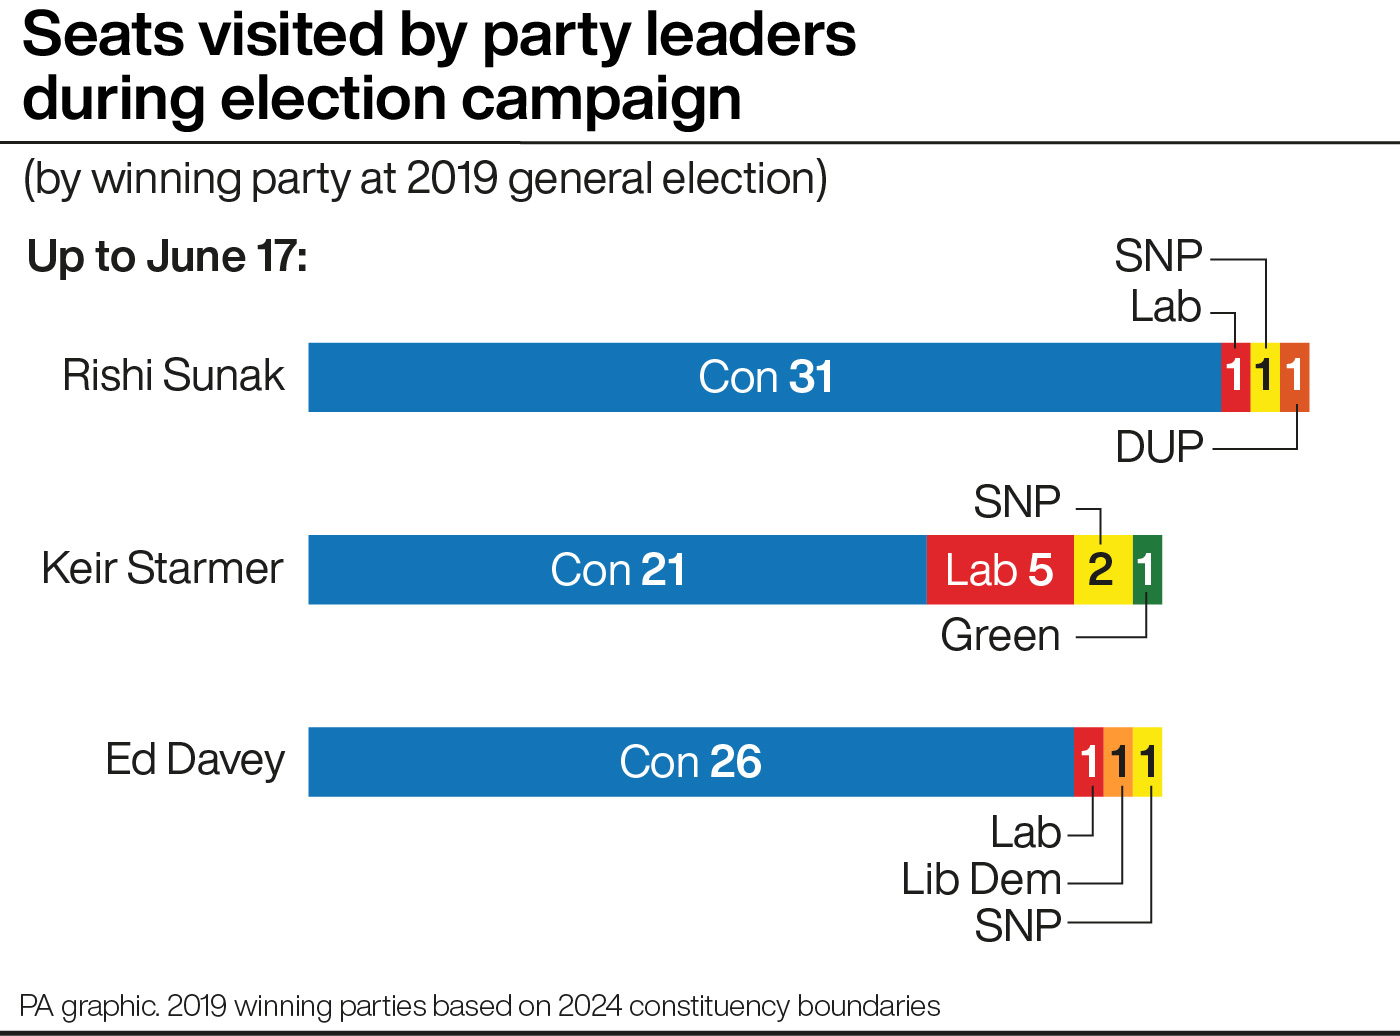 A chart showing the number of seats visited by the main party leaders on the election campaign so far, with Rishi Sunak on 34 and both Keir Starmer and Ed Davey on 29